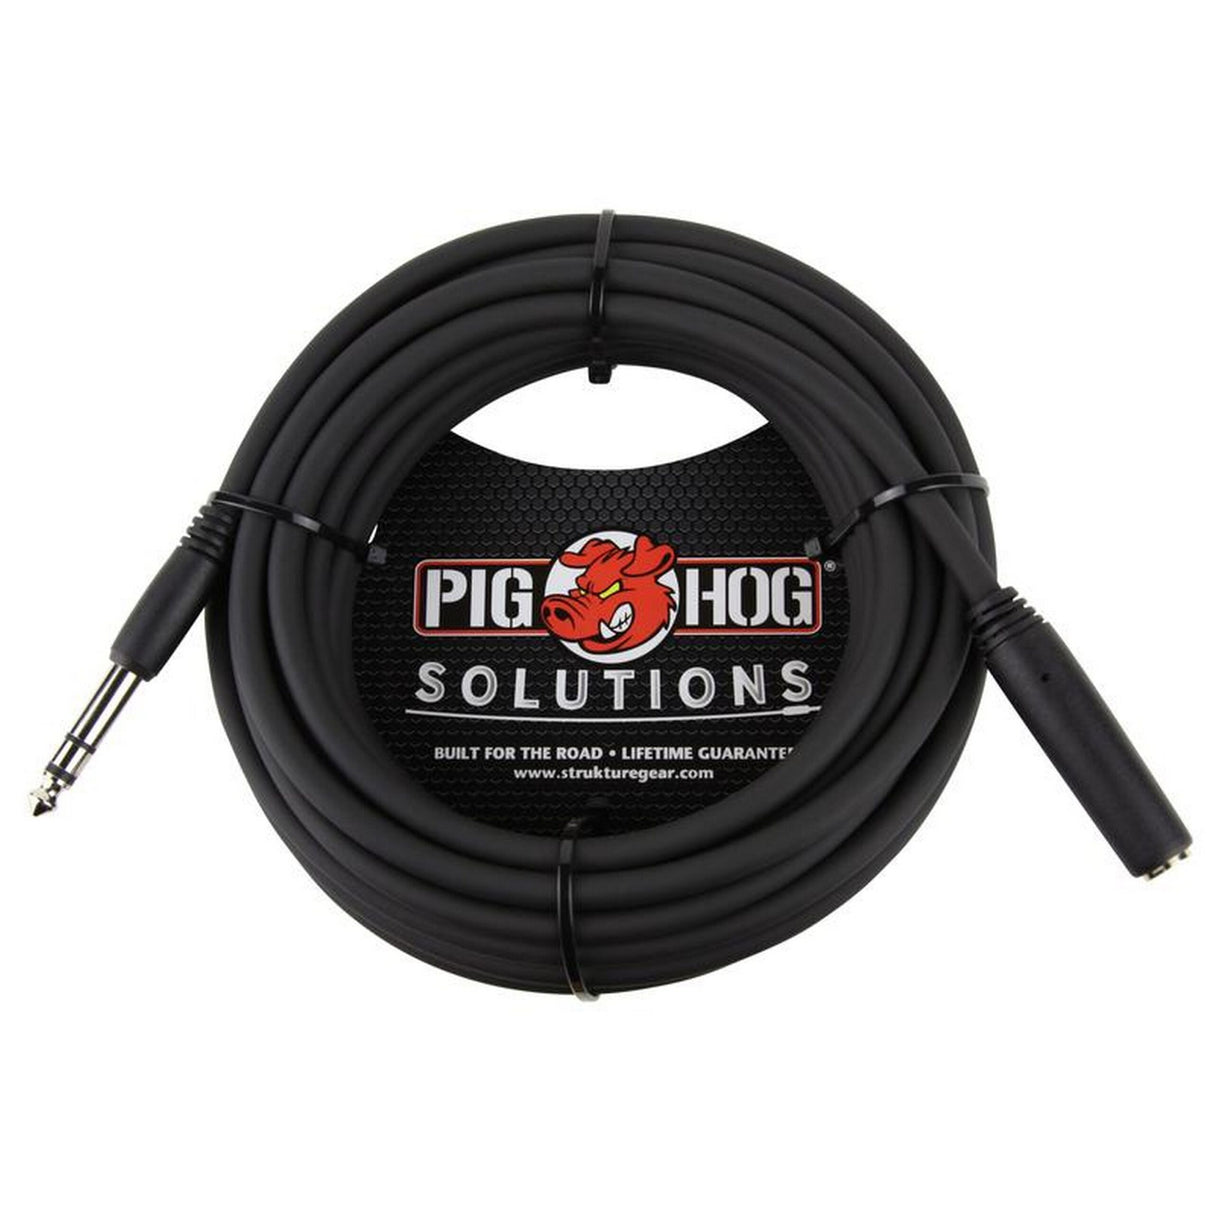 Pig Hog PHX14-25 25-Foot 1/4-Inch Headphone Extension Cable